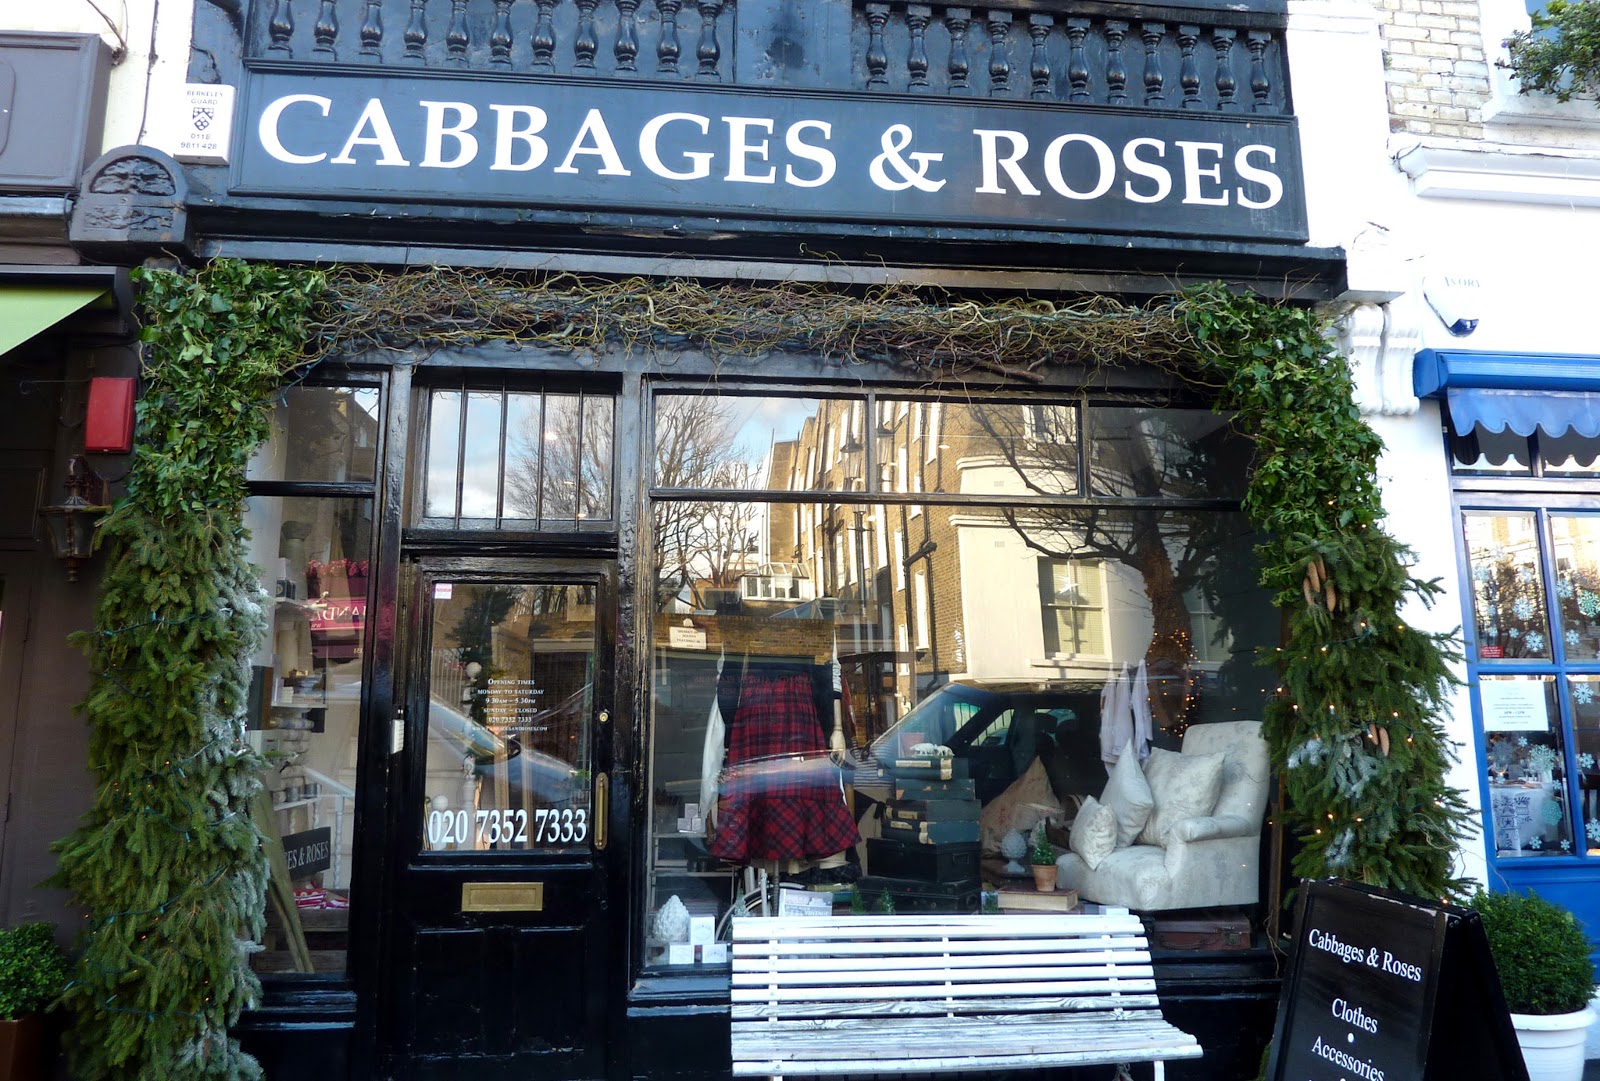 to the Cabbages & Roses Website